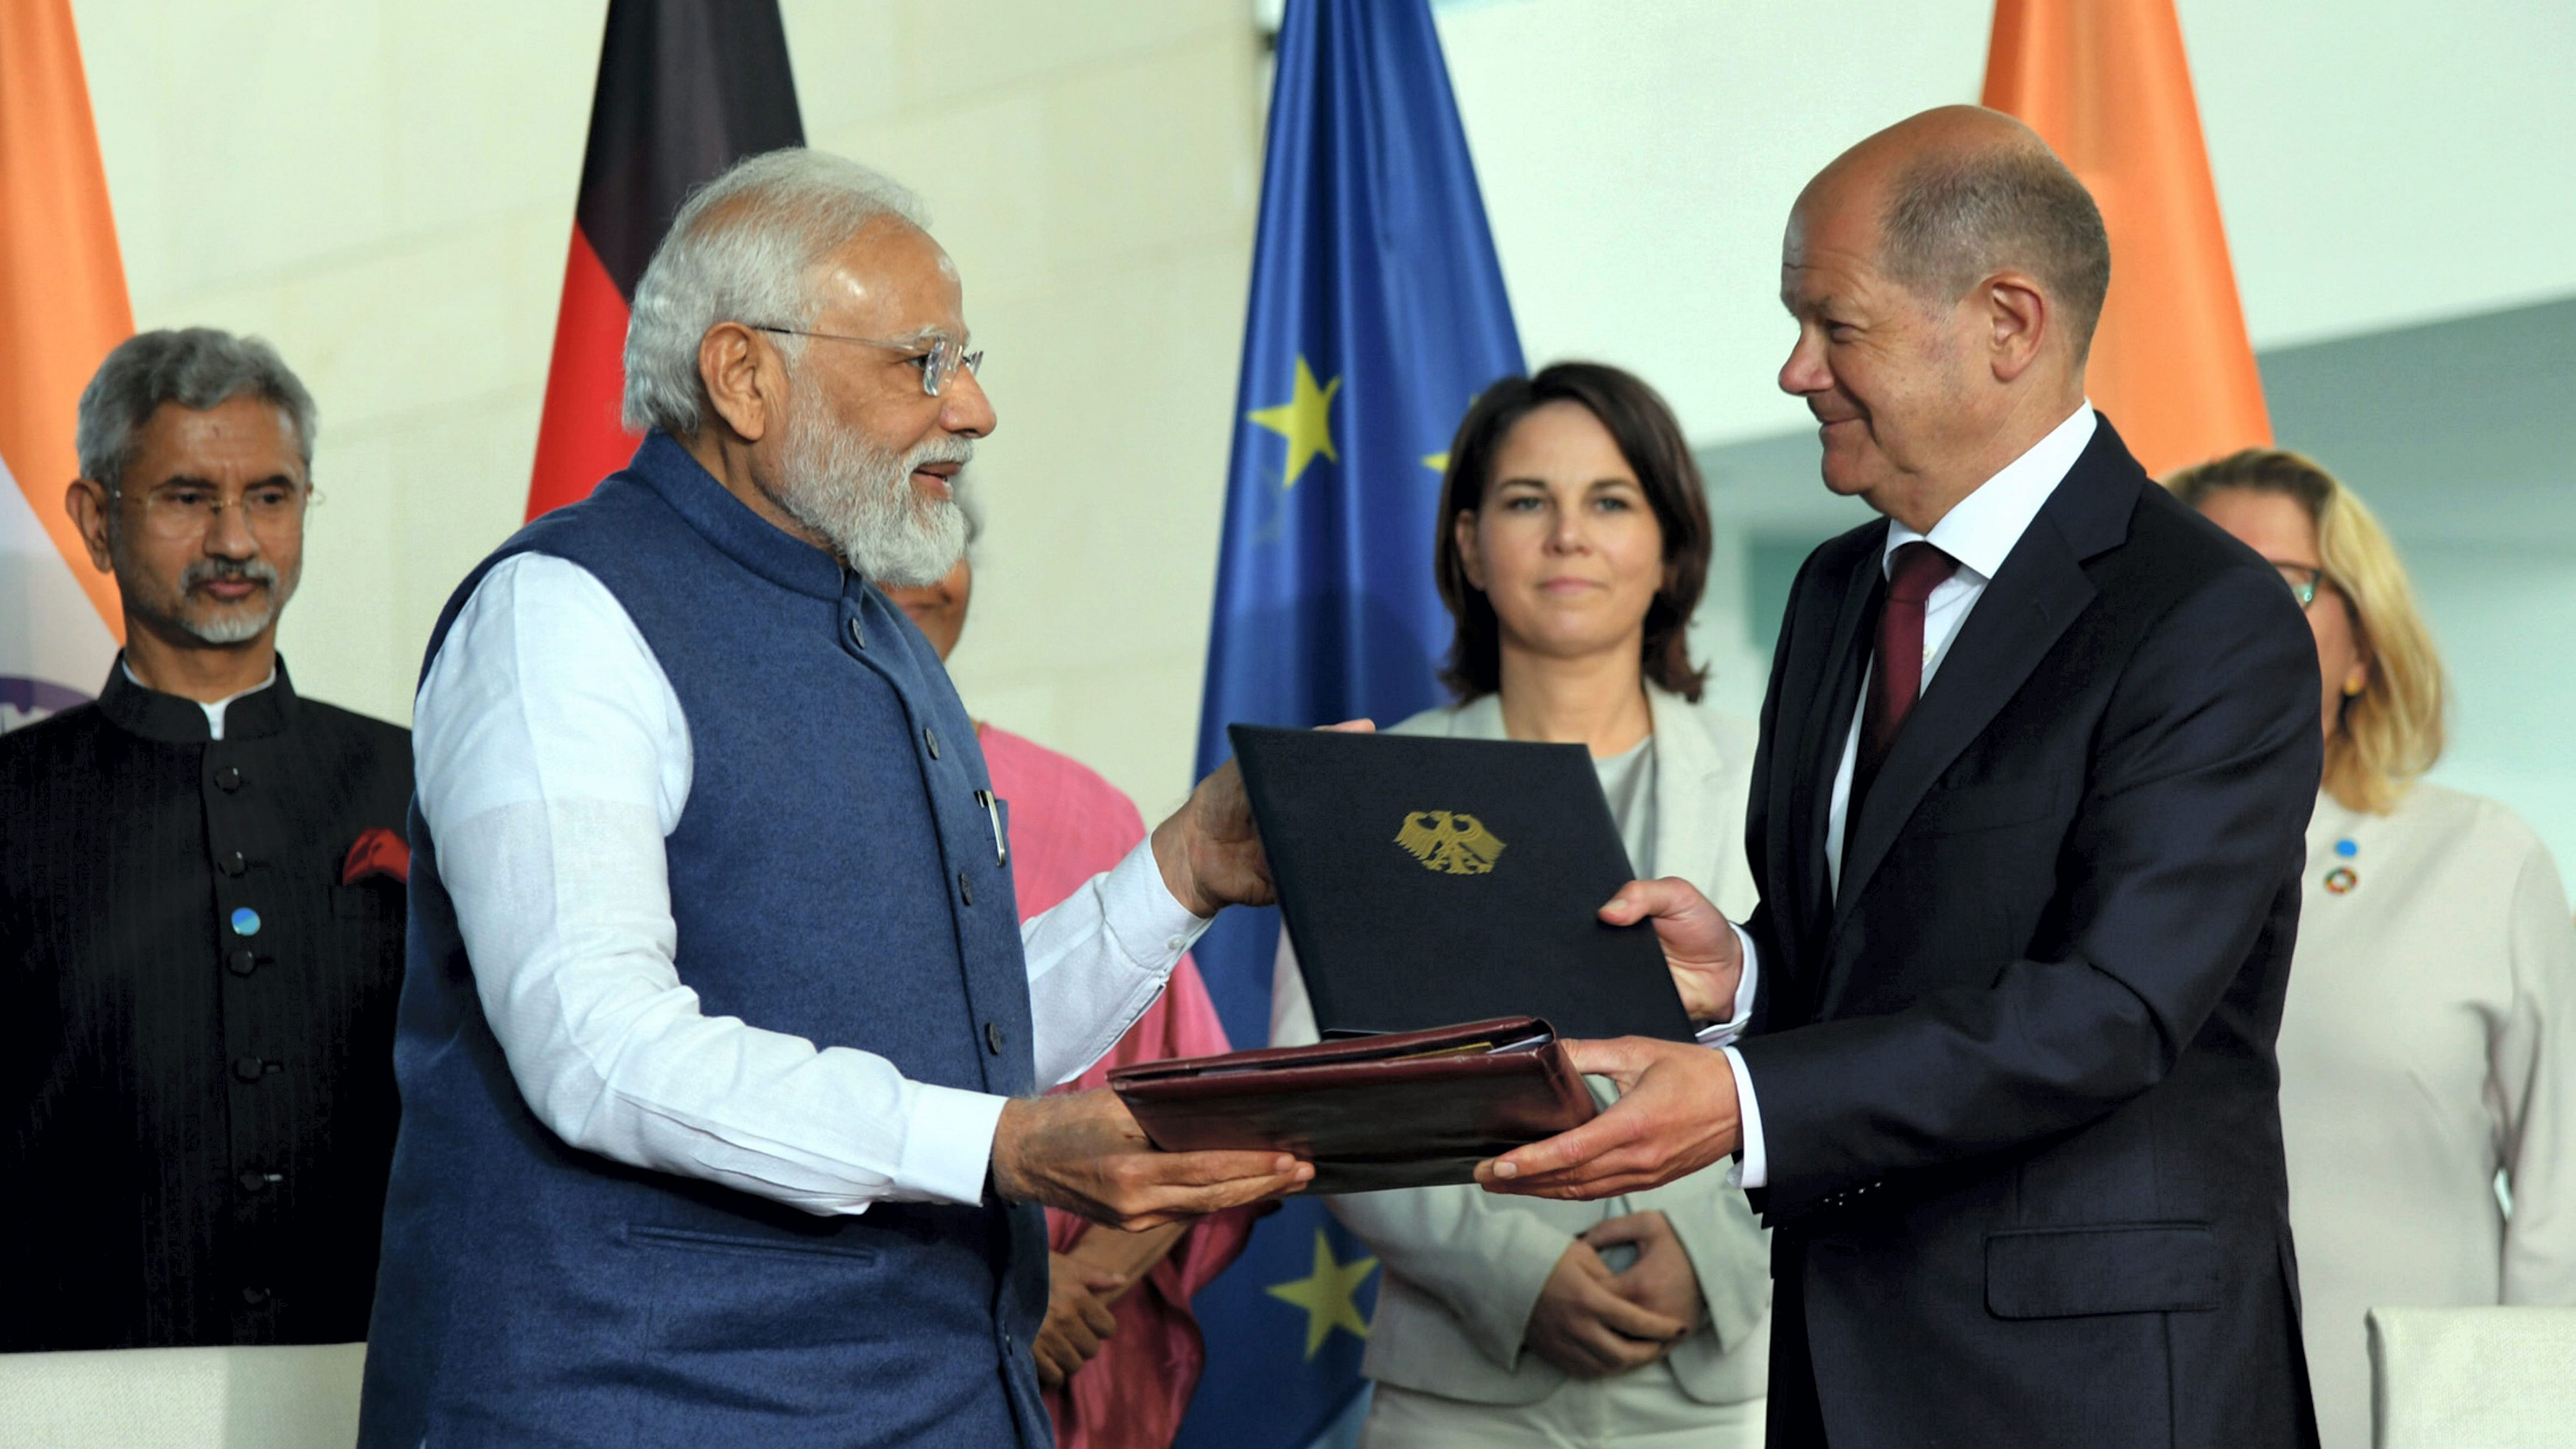 Prime Minister Narendra Modi with Chancellor of Germany Olaf Scholz signing the agreement, during the 6th India-Germany Inter-Governmental Consultations, at Federal Chancellery, in Berlin. Credit: PIB Handout